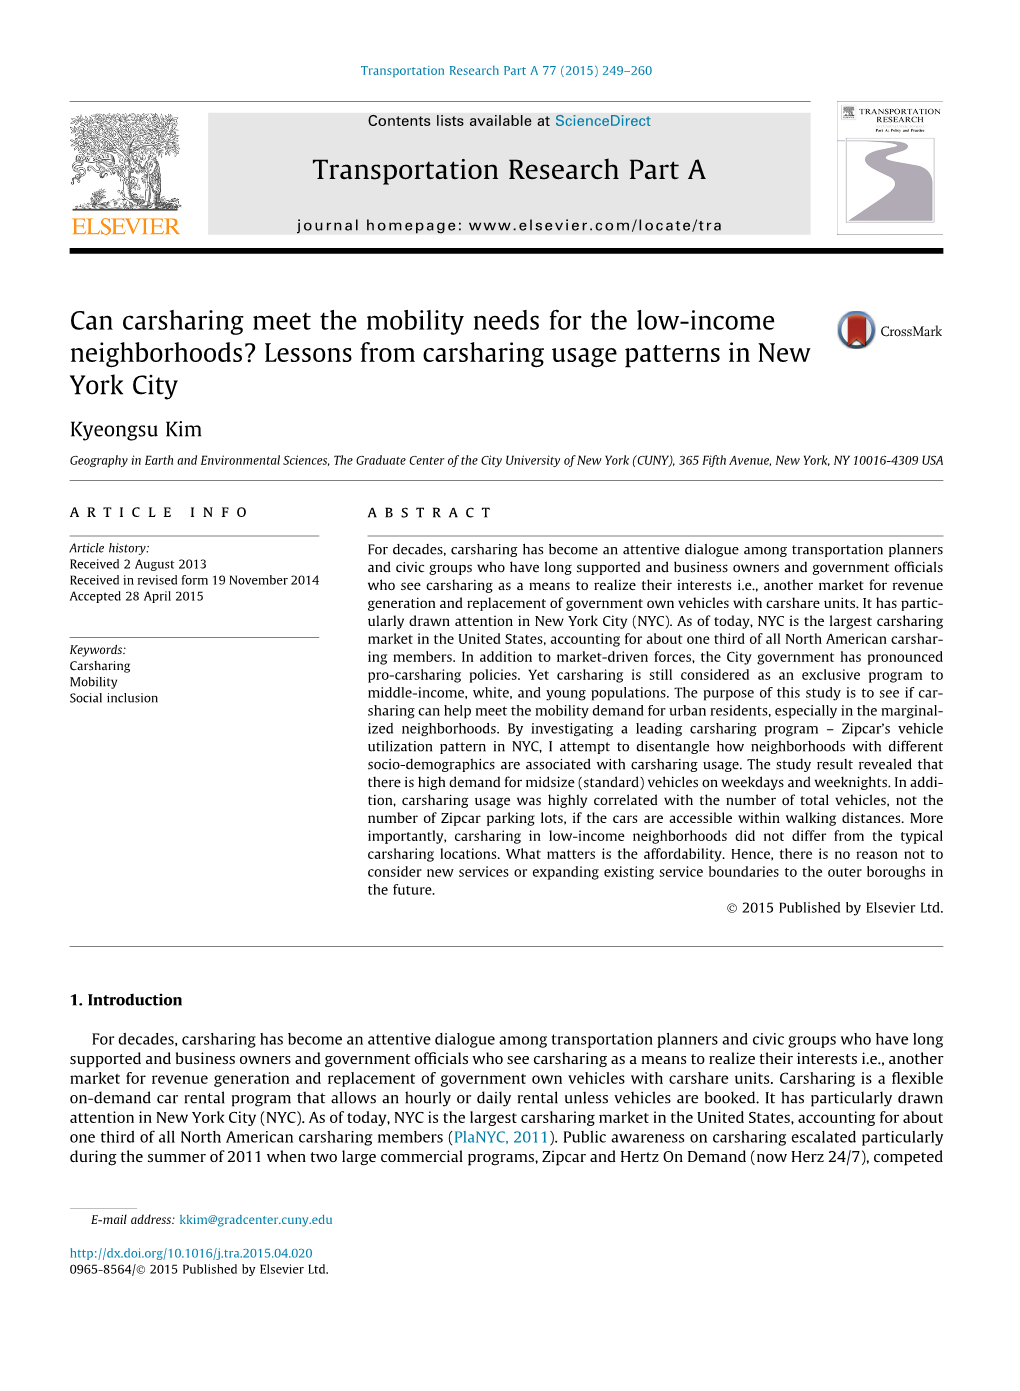 Can Carsharing Meet the Mobility Needs for the Low-Income Neighborhoods? Lessons from Carsharing Usage Patterns in New York City